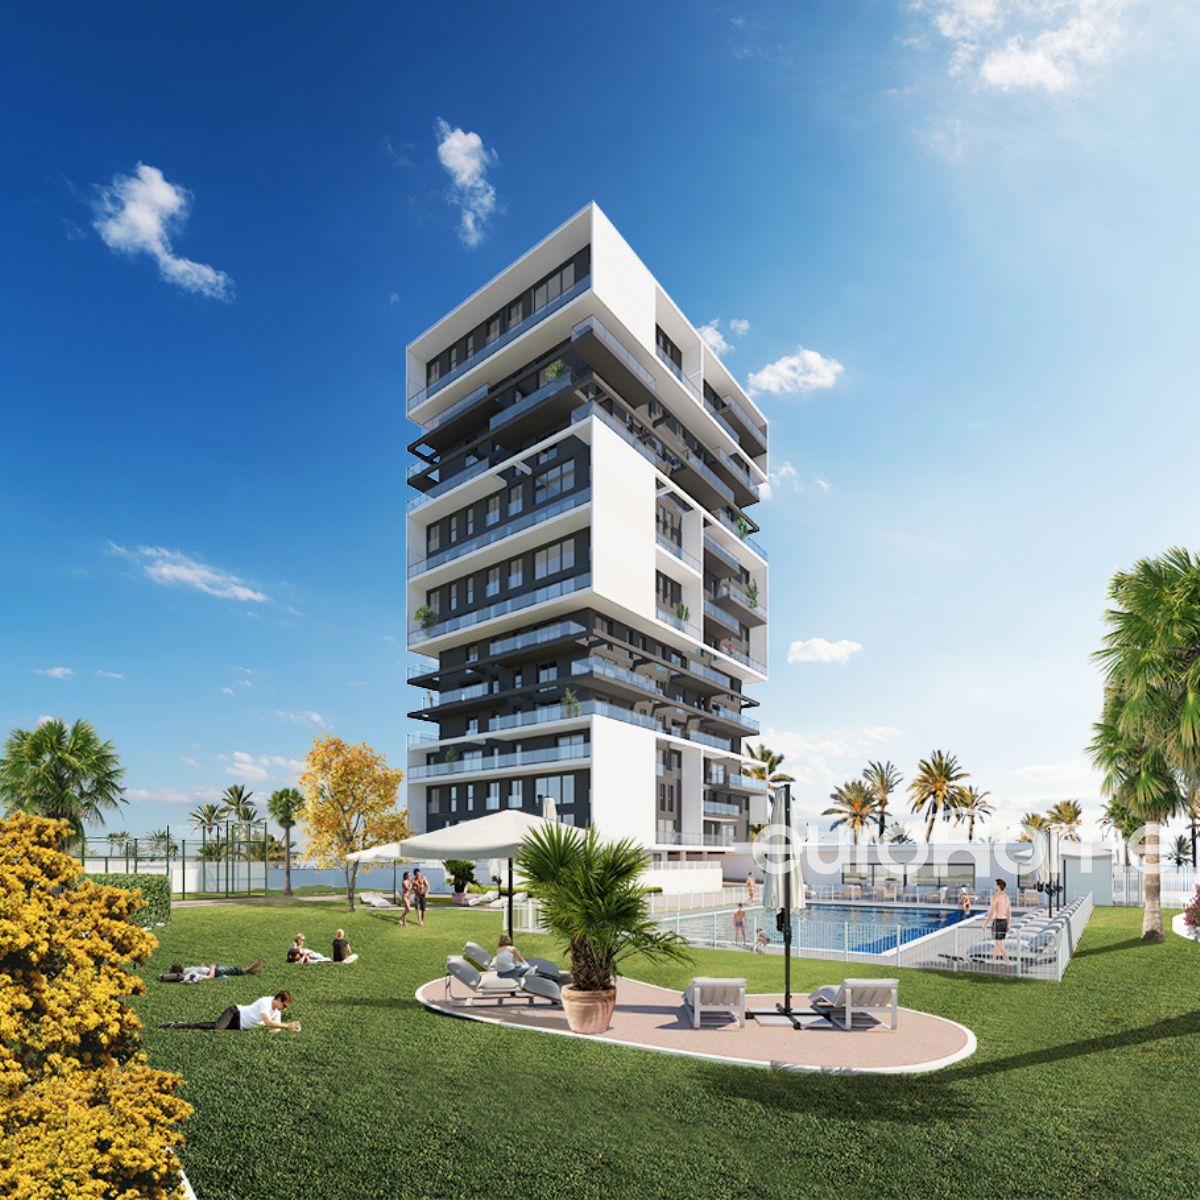 New promotion in Calpe, consisting of 67 apartments with 2 or 3 bedrooms and ample terraces, ground floor apartments with garden and magnificent duplex apartments. 